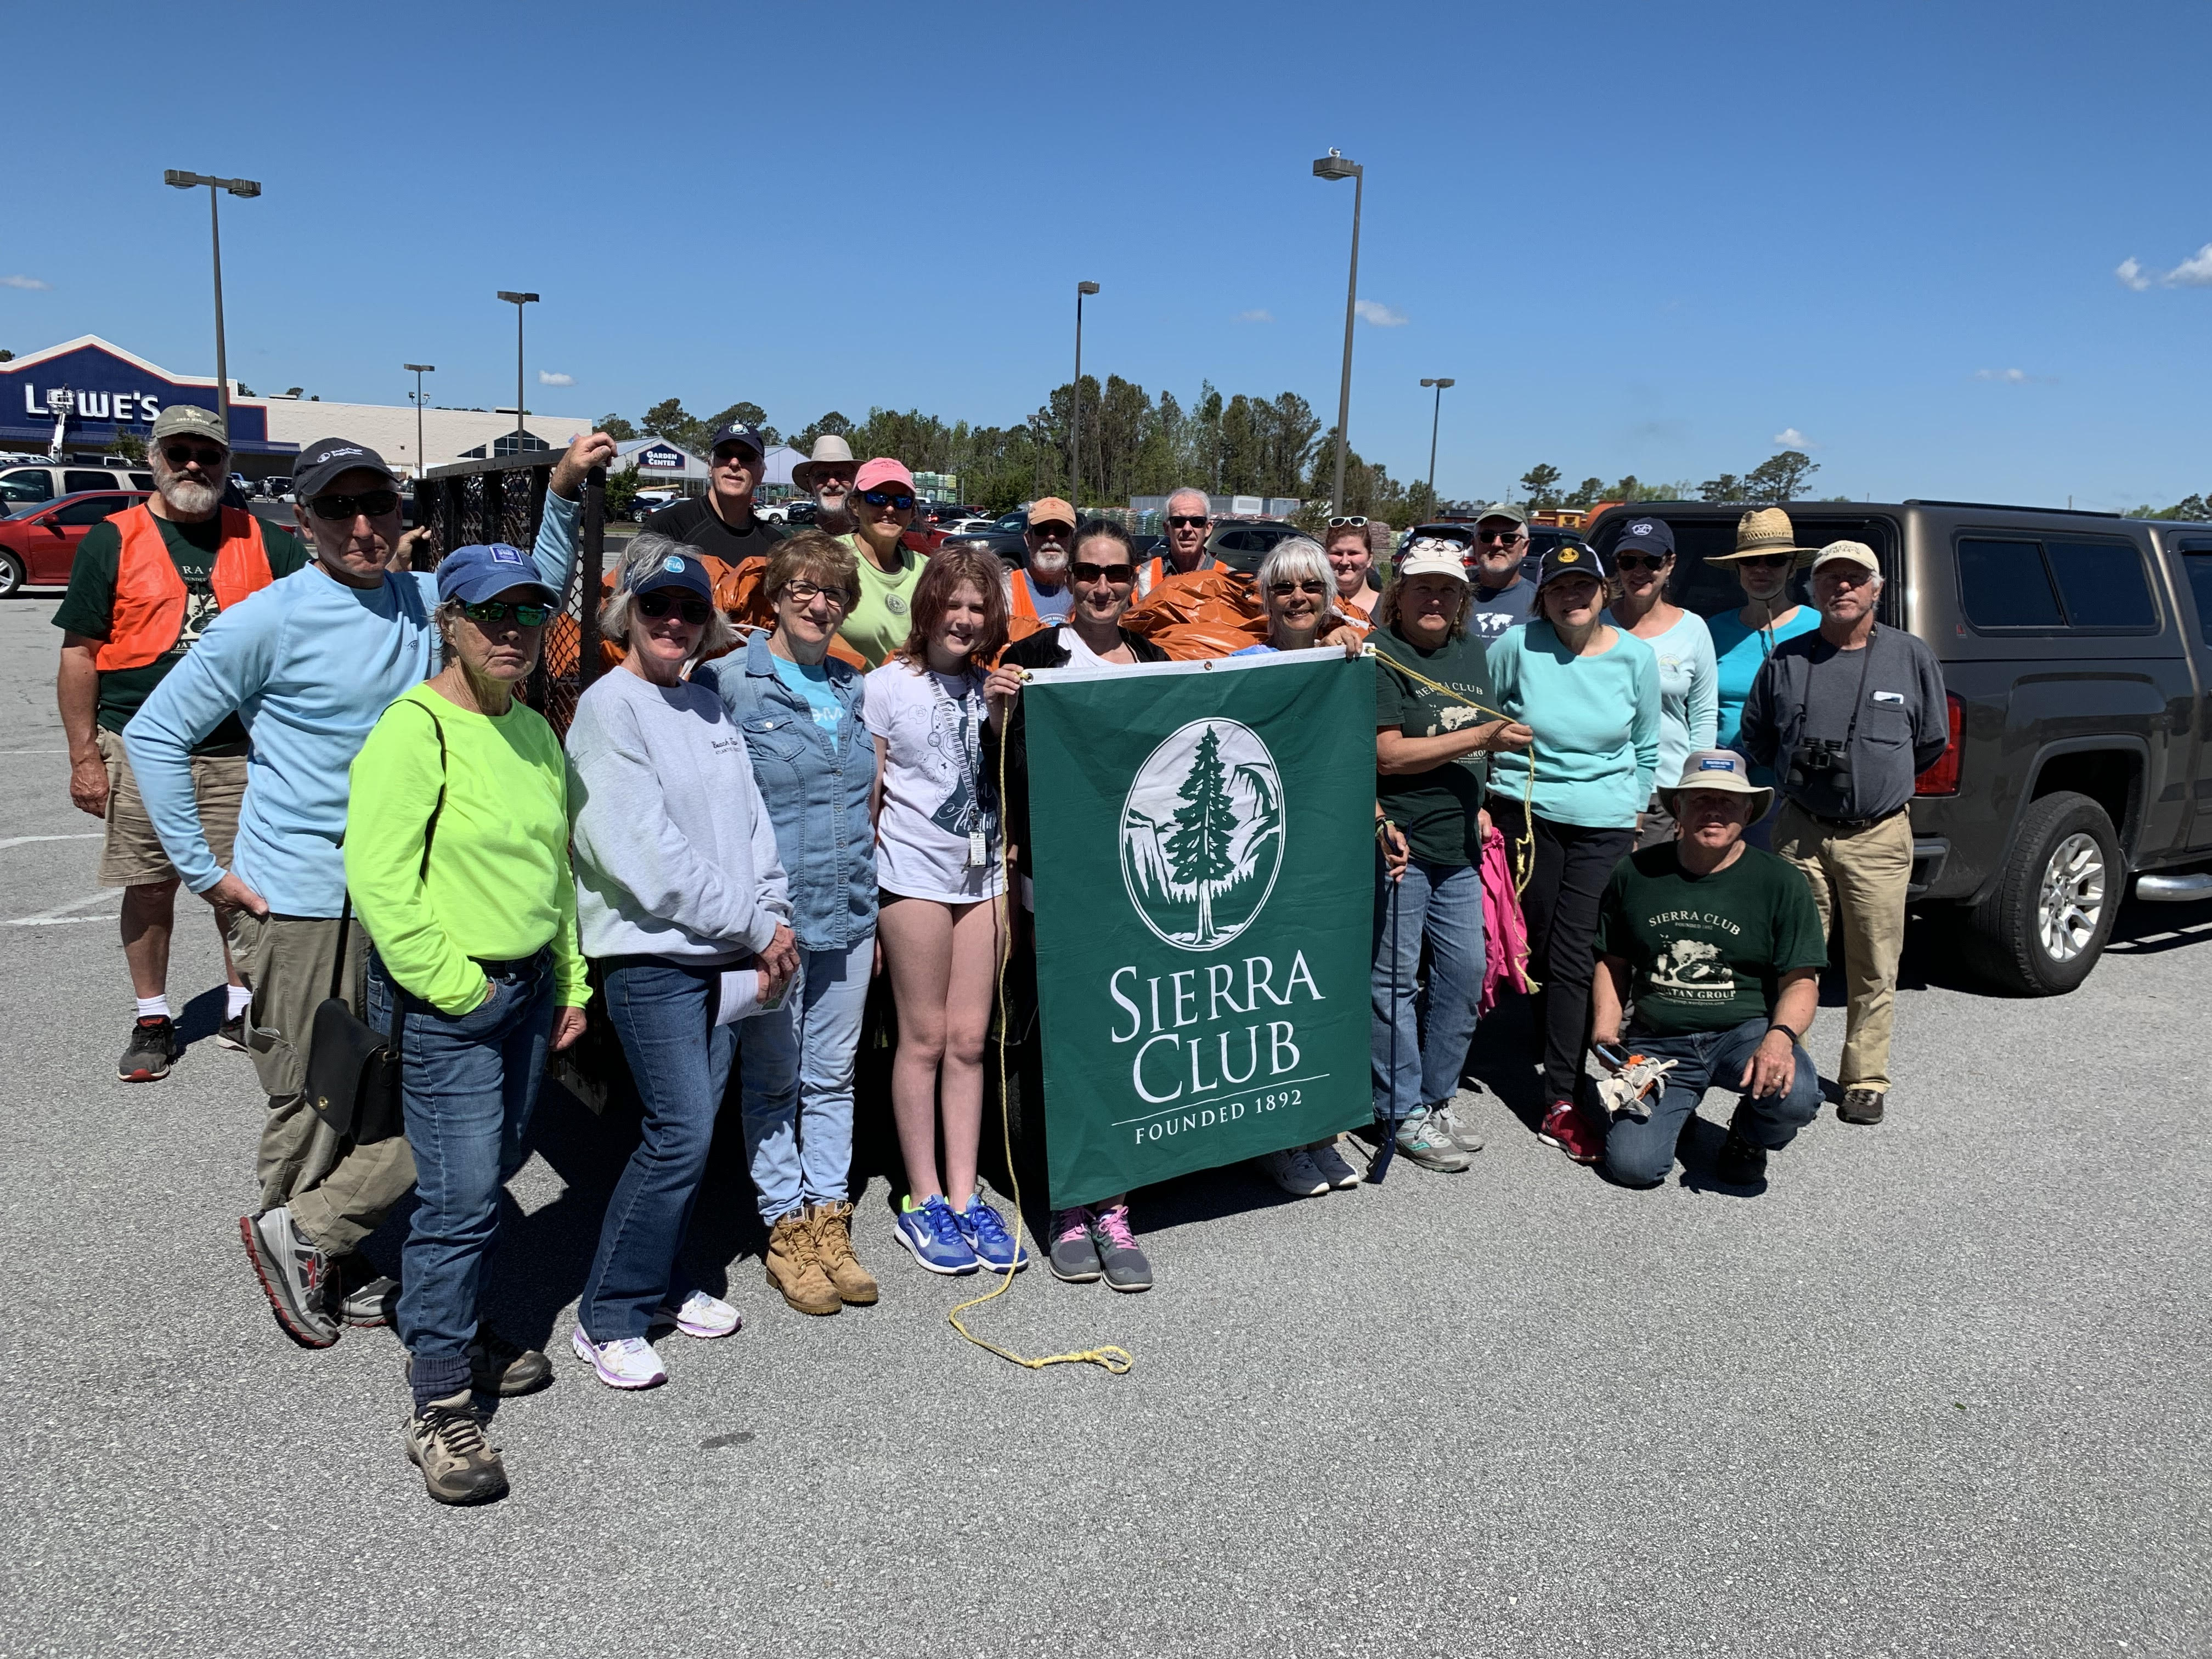 A group of approximately 20 people stand in a parking lot holding a Sierra Club banner